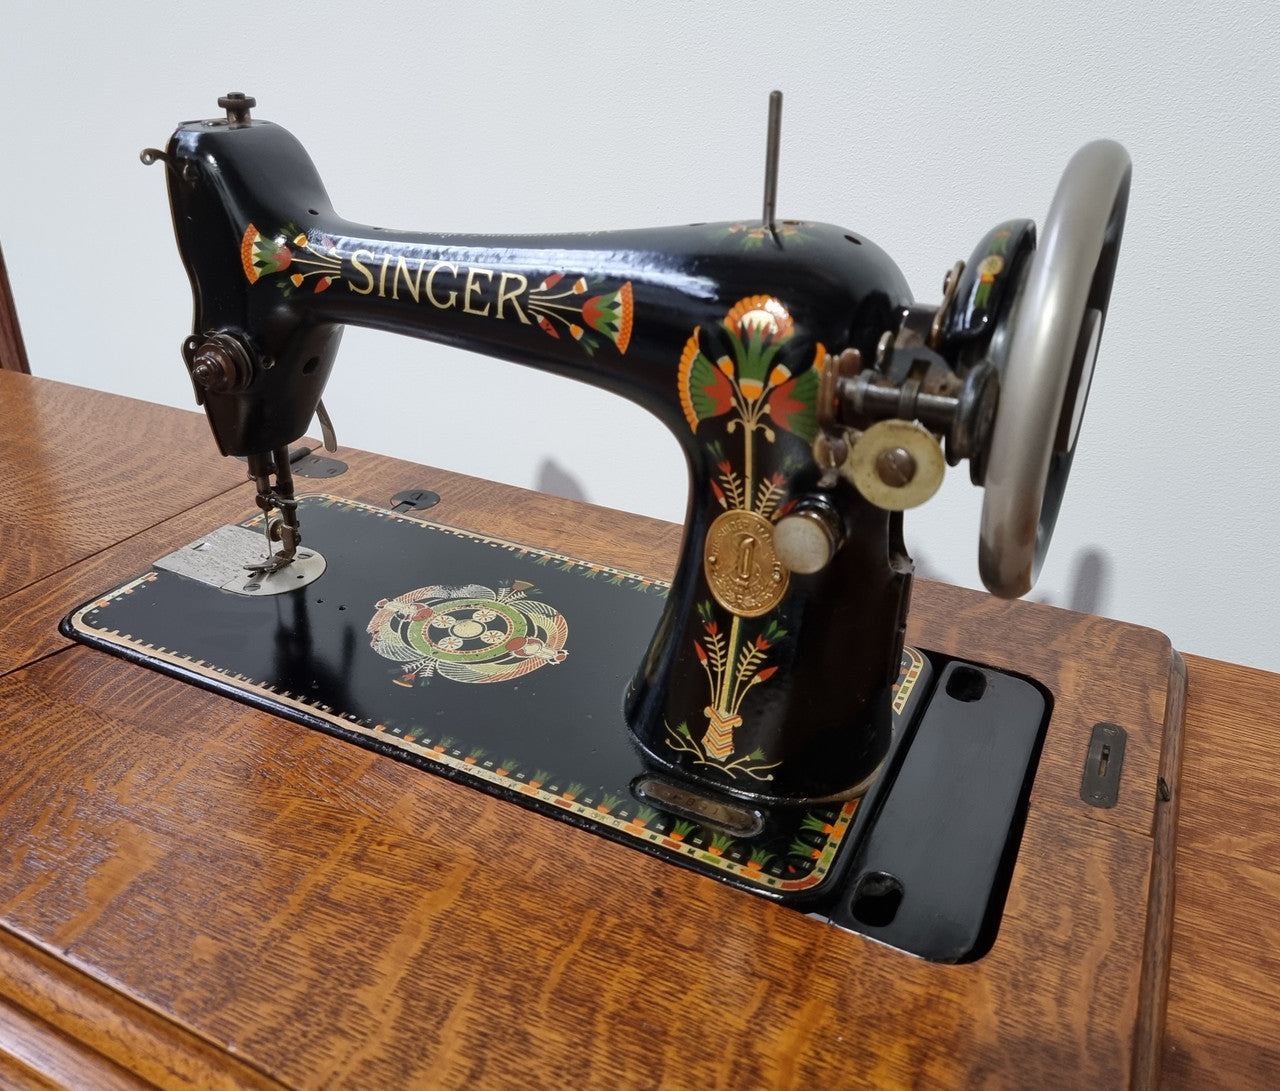 Beautiful Singer sewing machine in an Oak case with six drawers, in mint condition for its age.